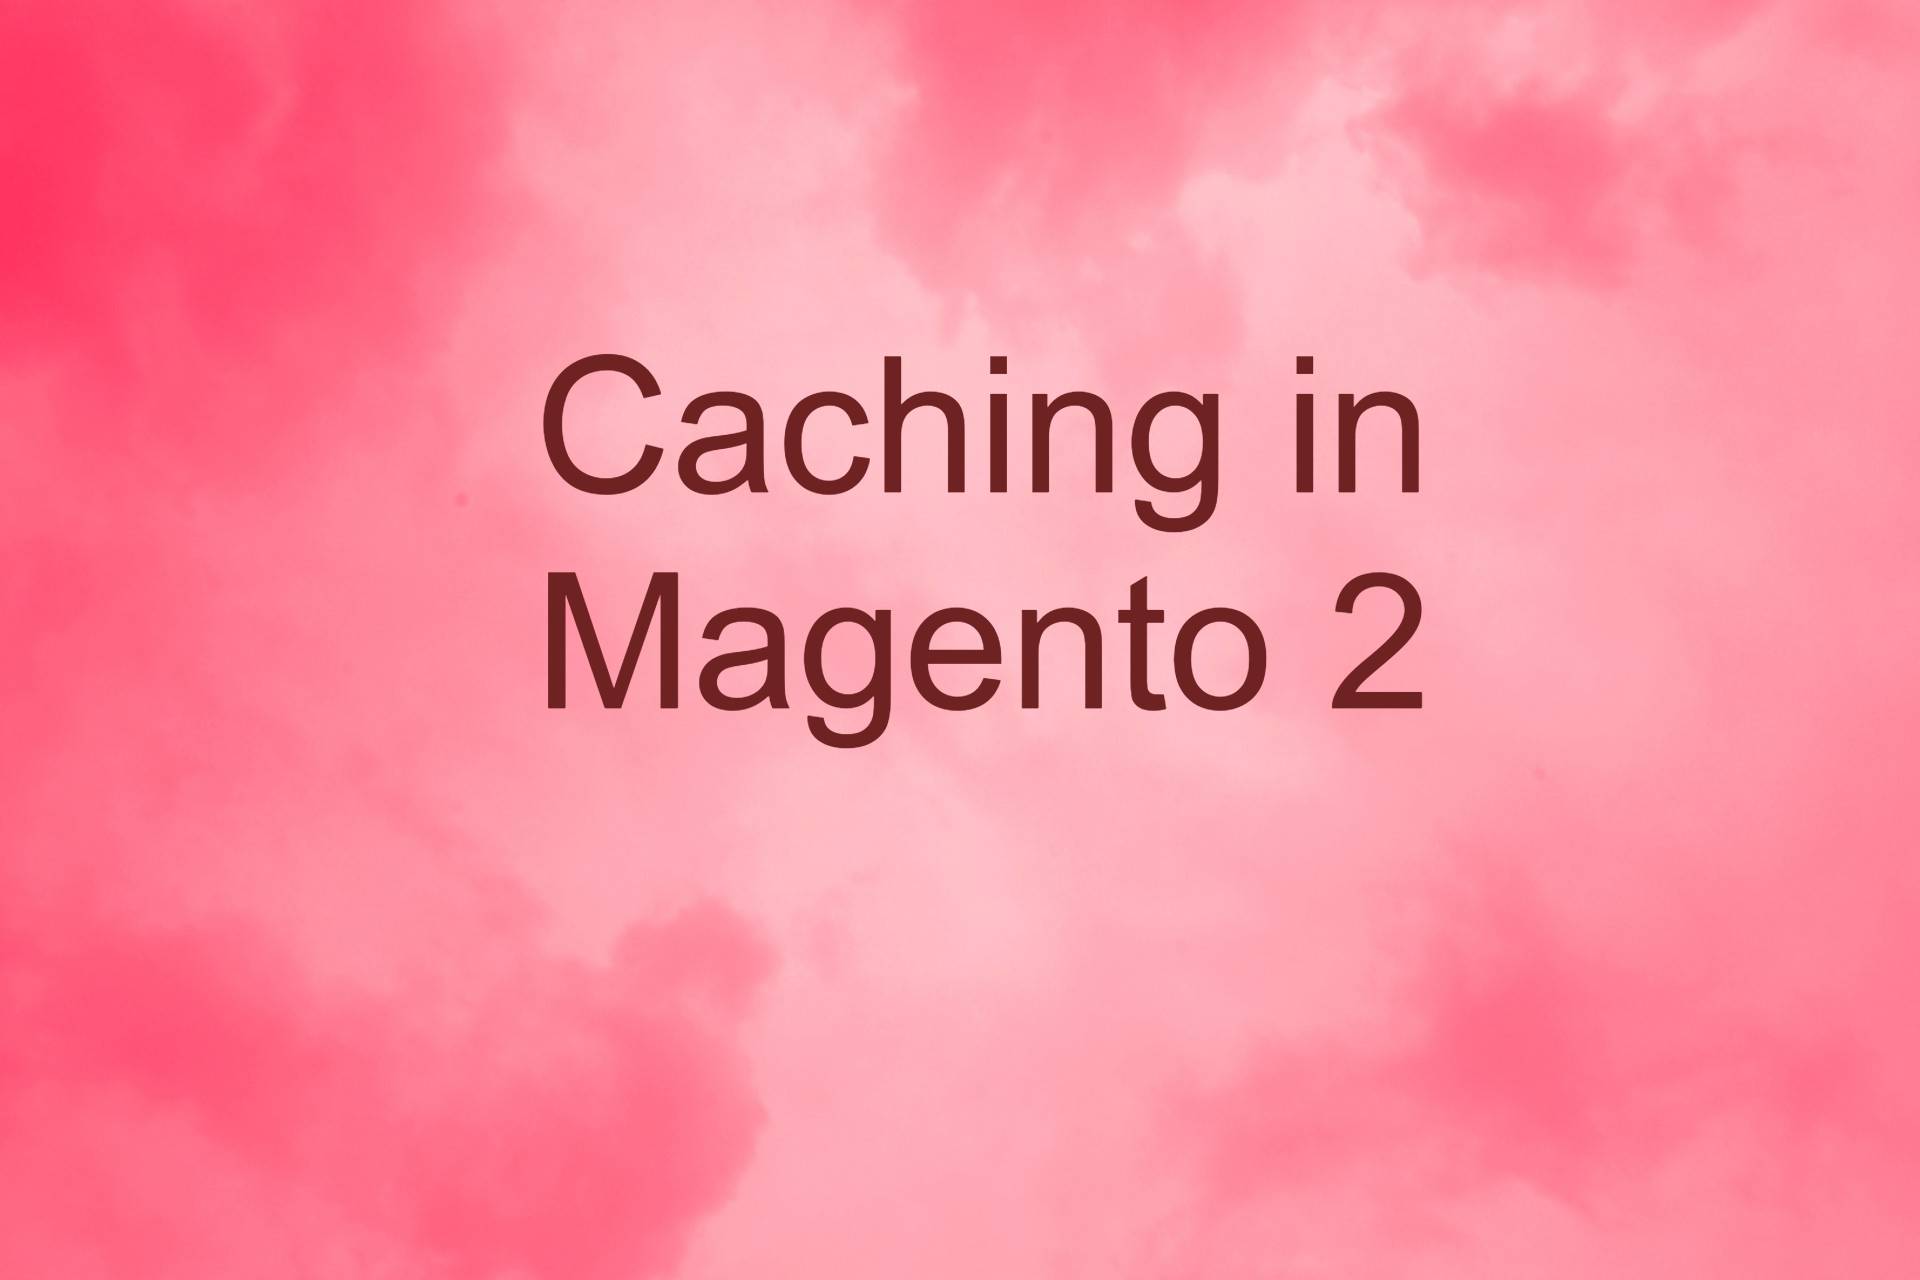 Caching in Magento 2